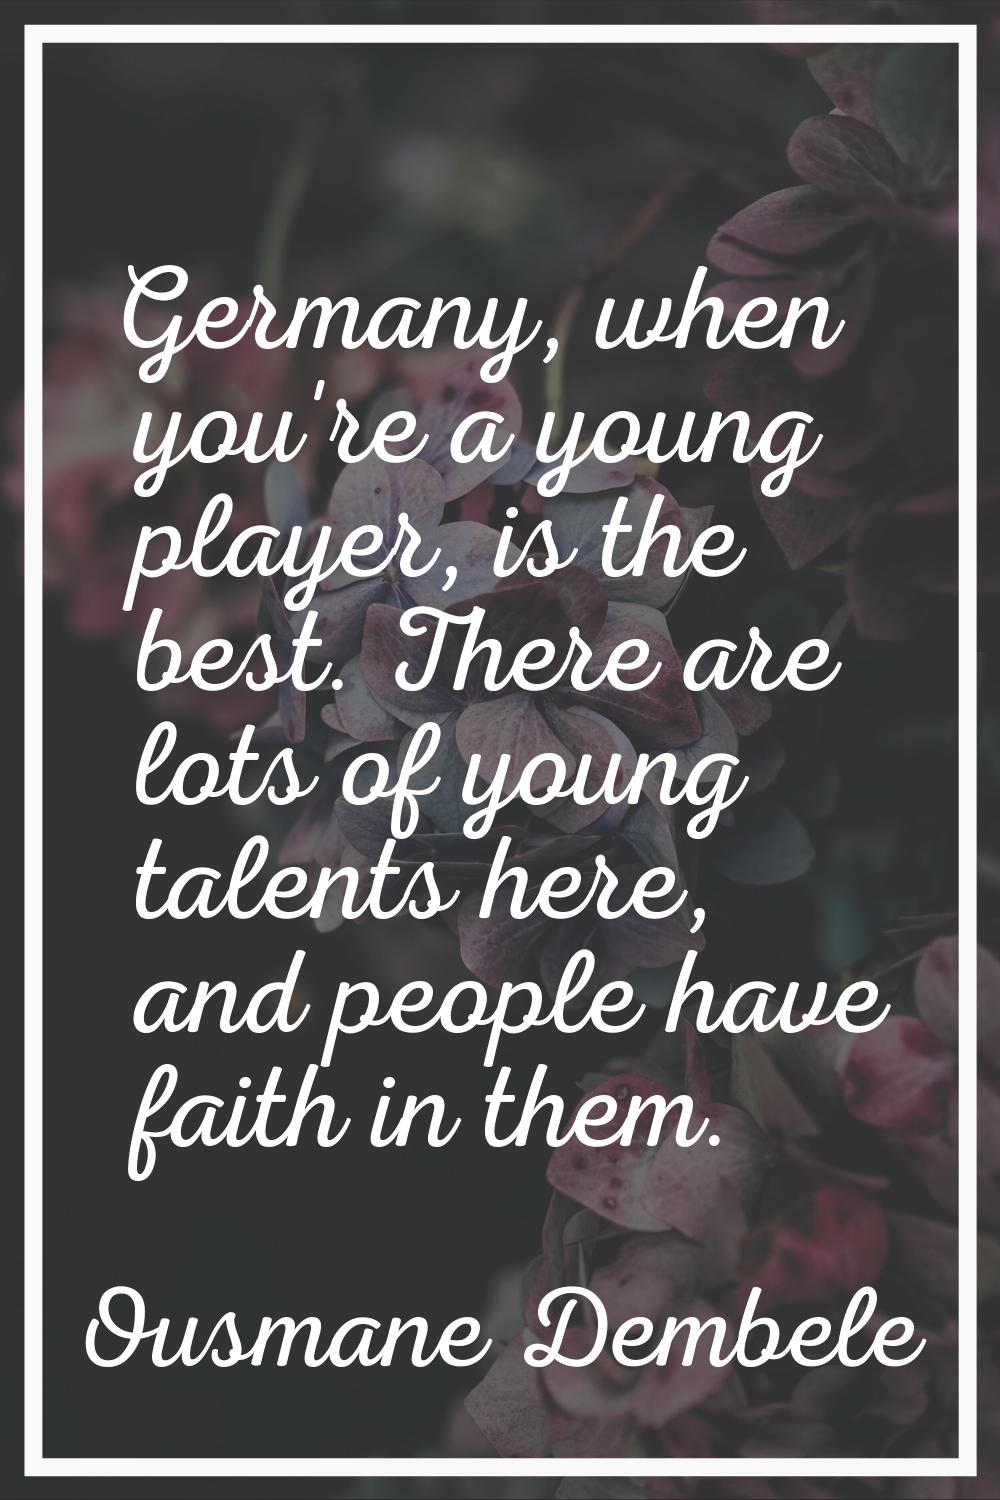 Germany, when you're a young player, is the best. There are lots of young talents here, and people 